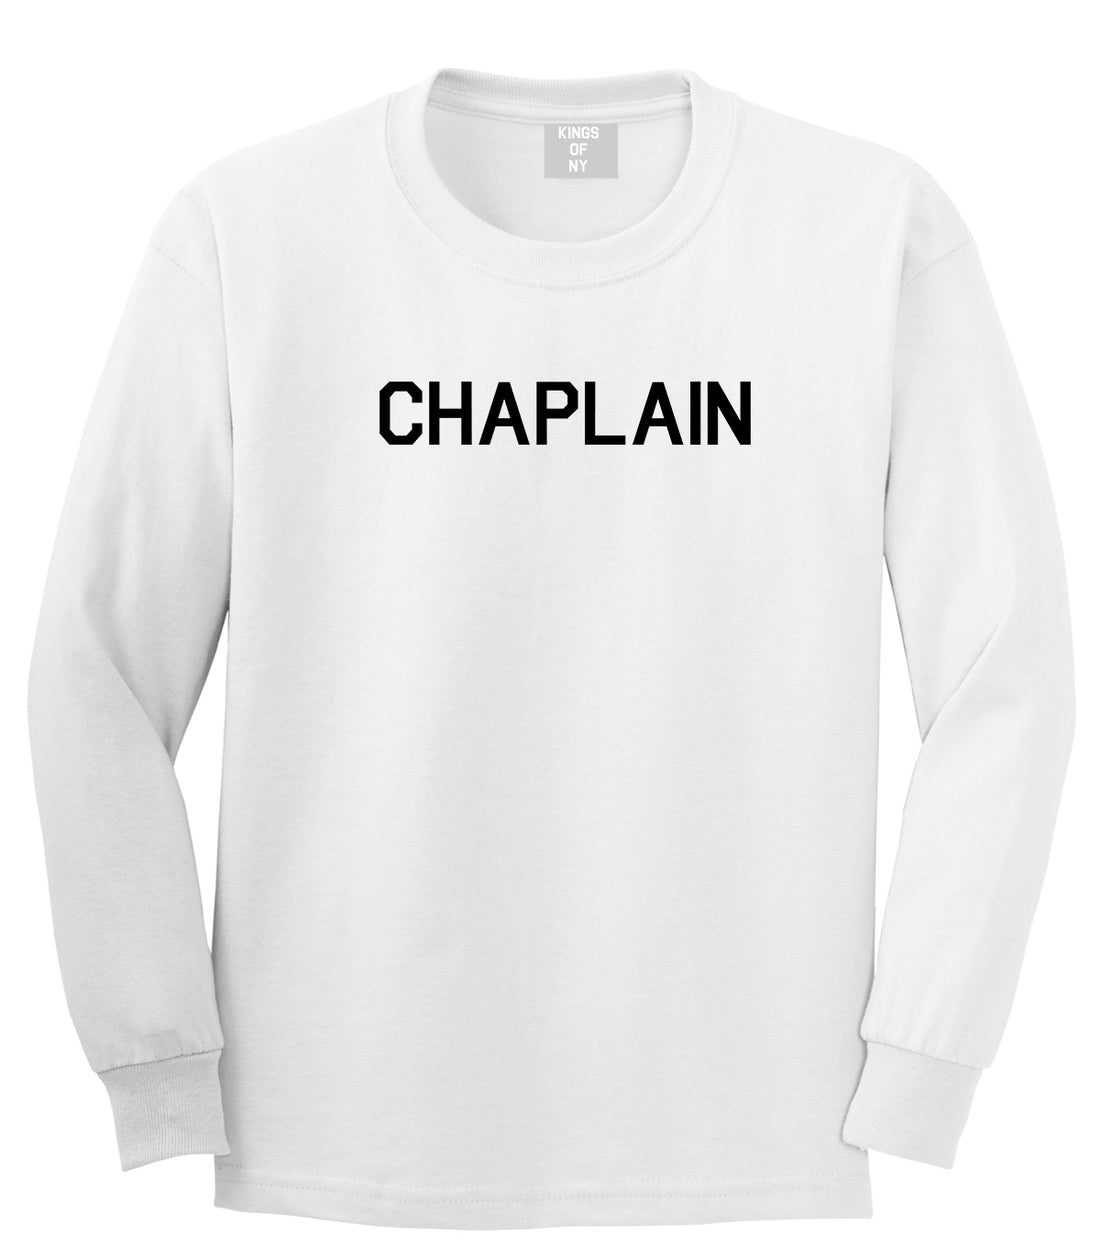 Christian Chaplain White Long Sleeve T-Shirt by Kings Of NY